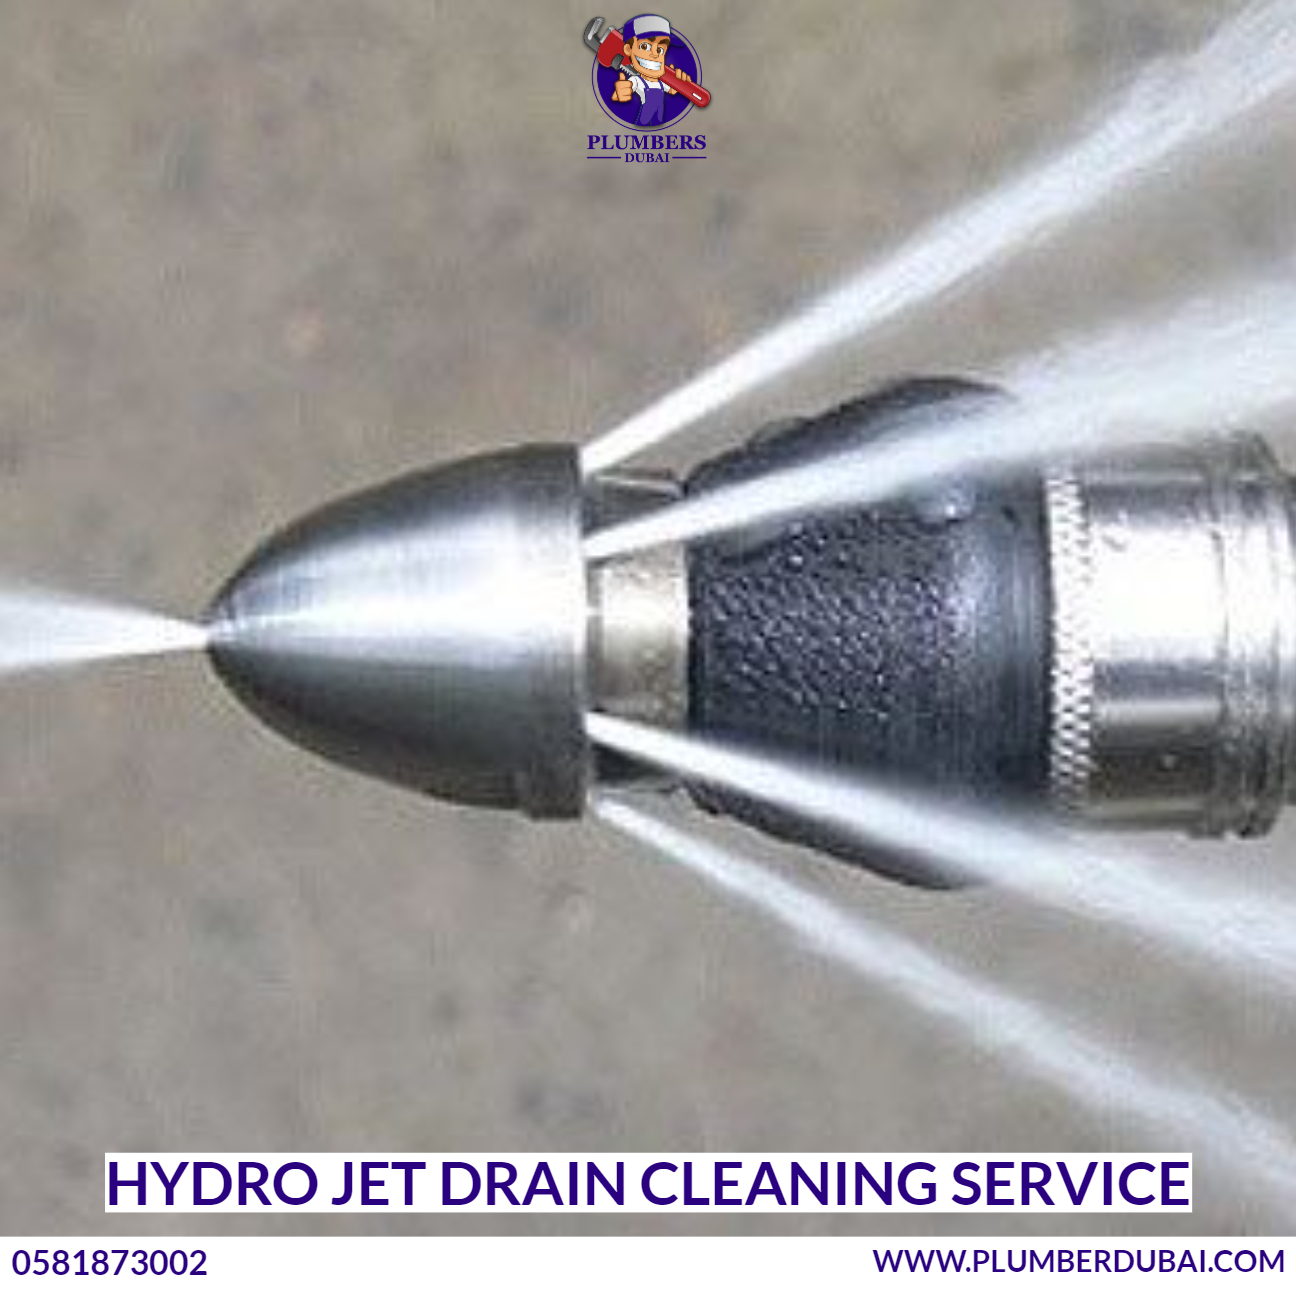 Hydro Jet Drain Cleaning Service